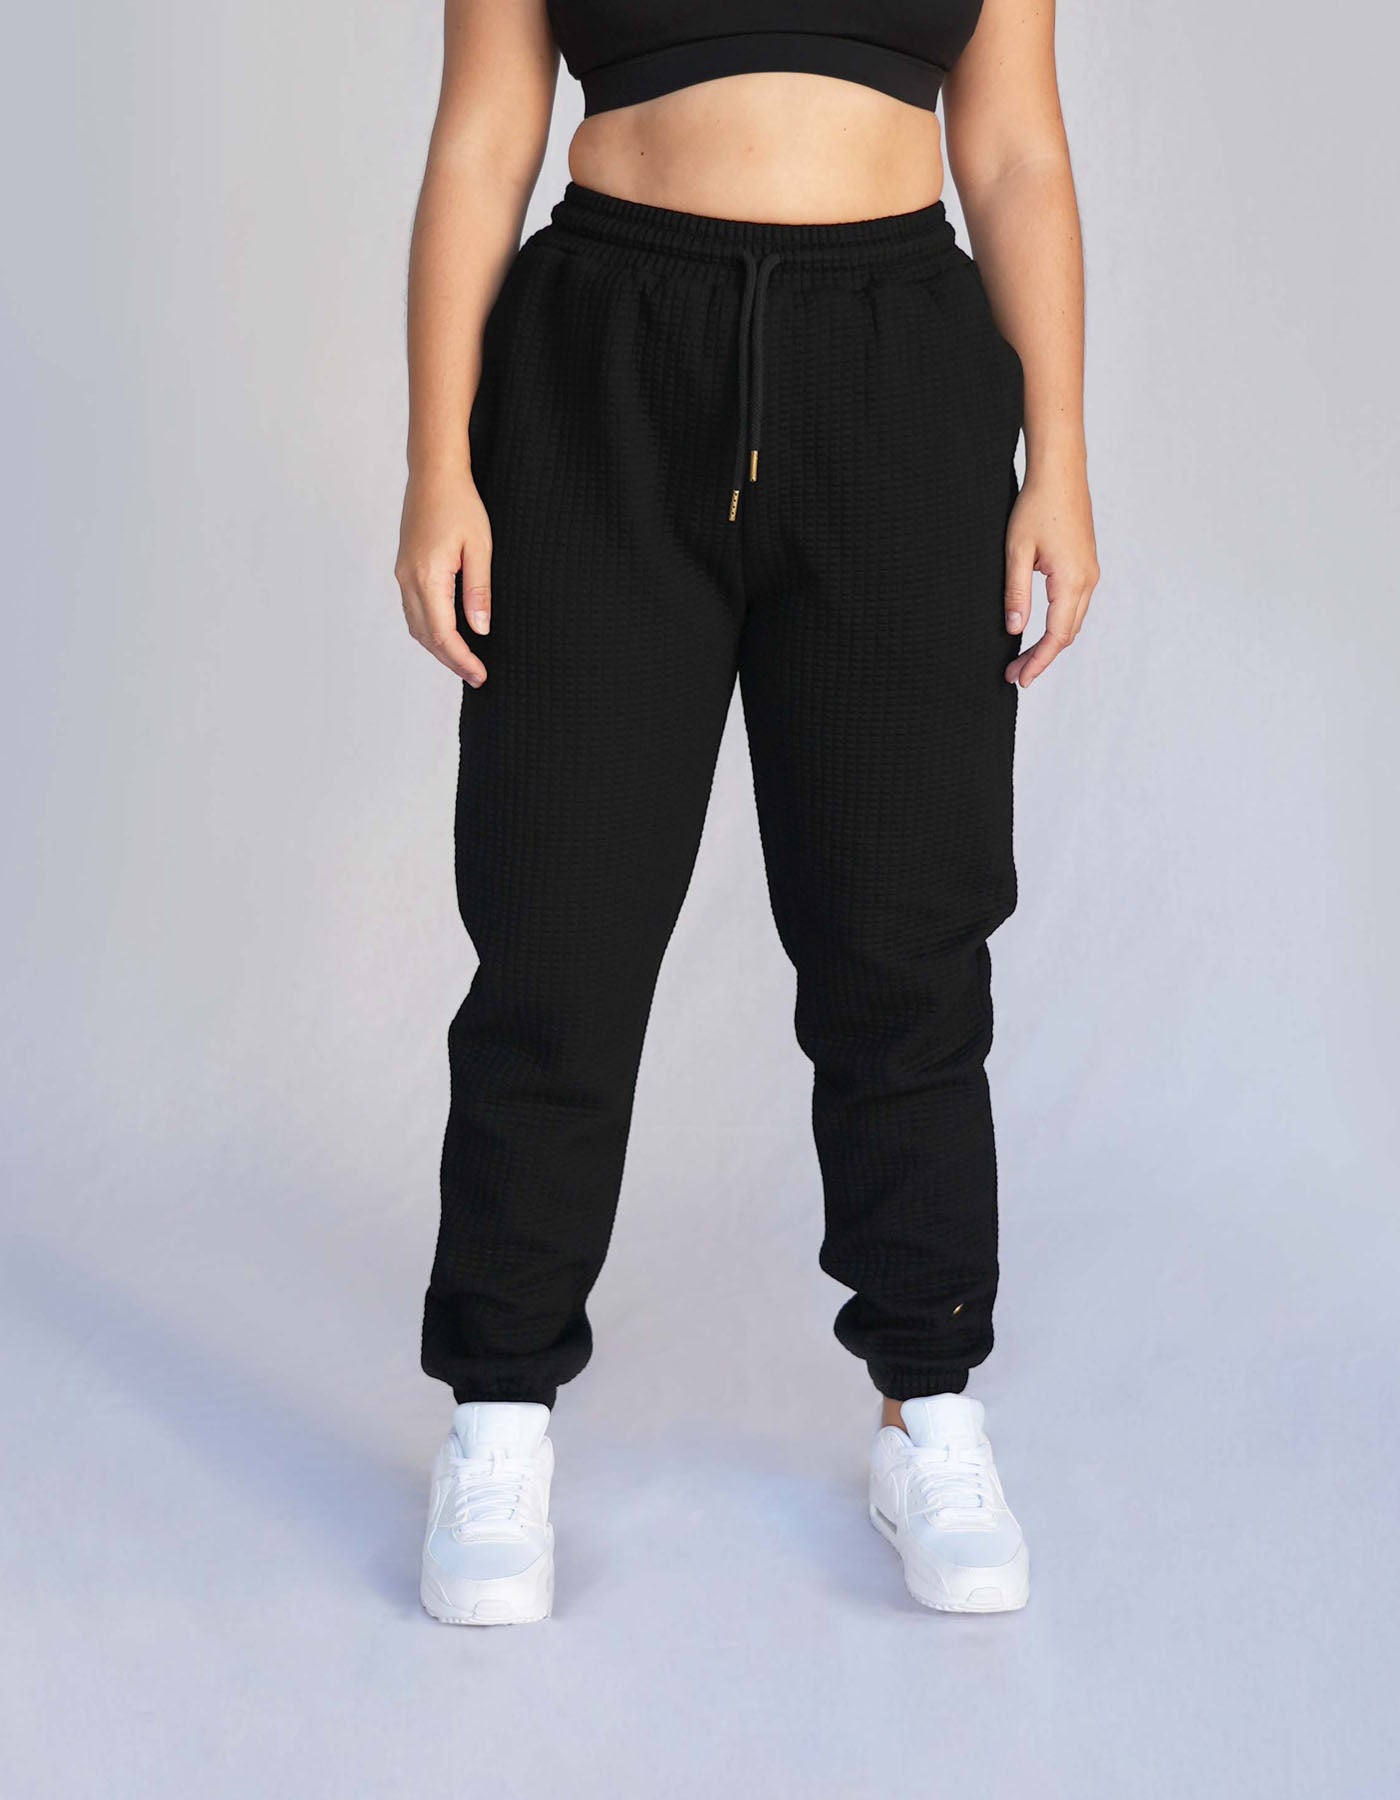 Crimson tavernorlando Phaedra Joggers in the color black. Waffle texture with pockets and drawstring to adjust the waistband.